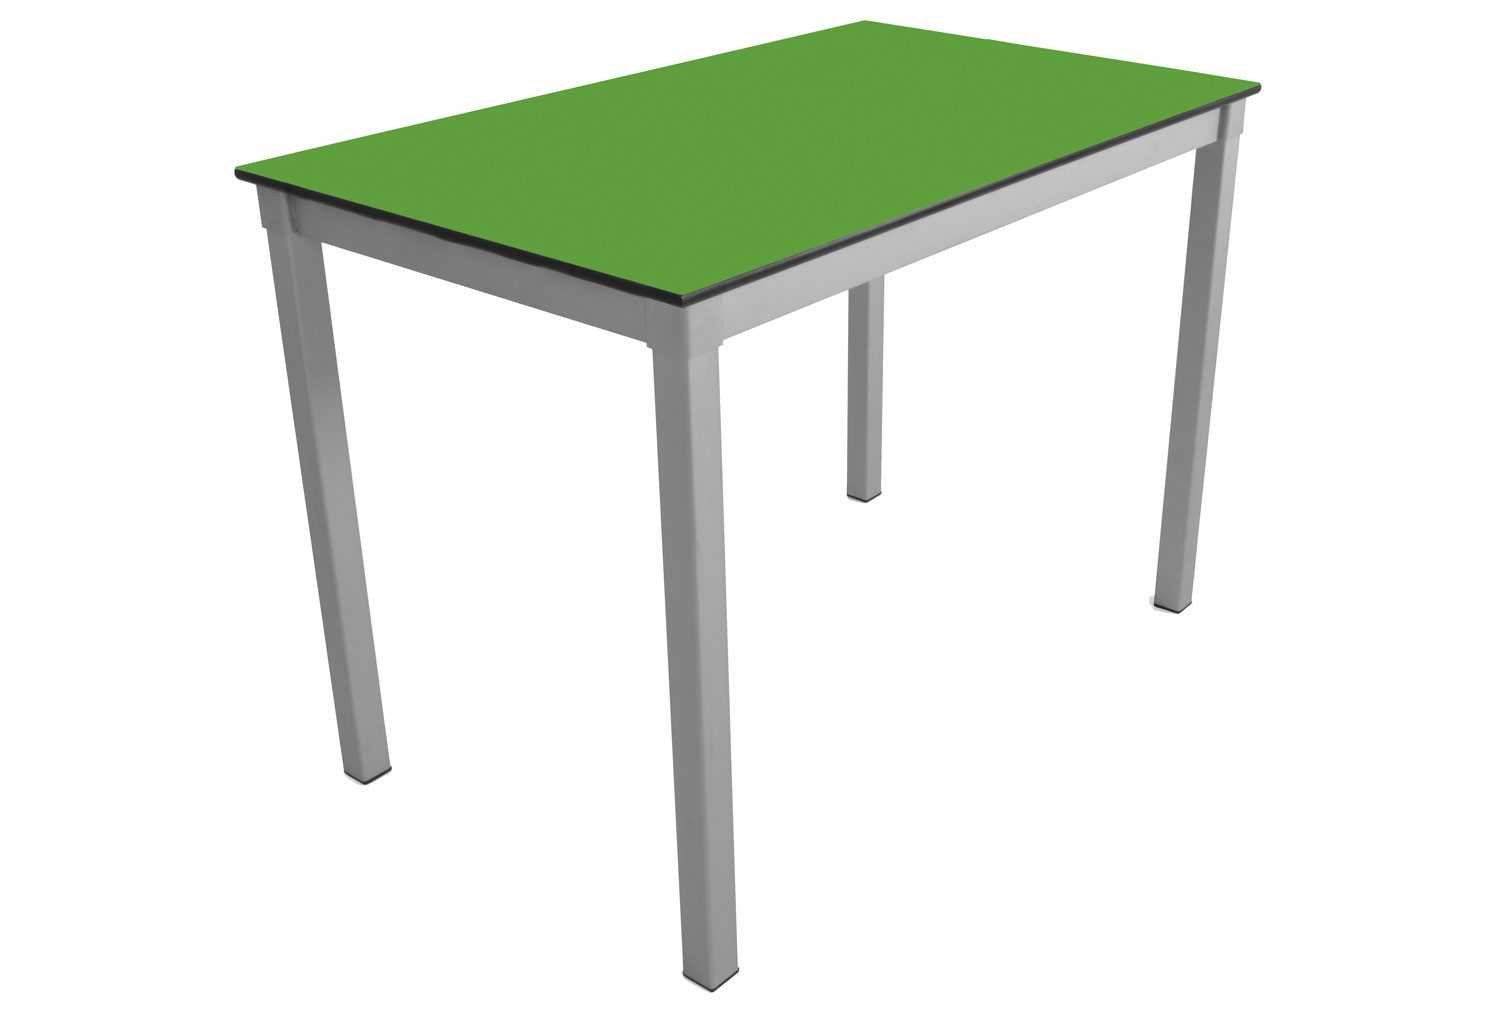 Gopak Enviro Compact Outdoor Table With Solid Top, 100wx59h (cm), Pea Green